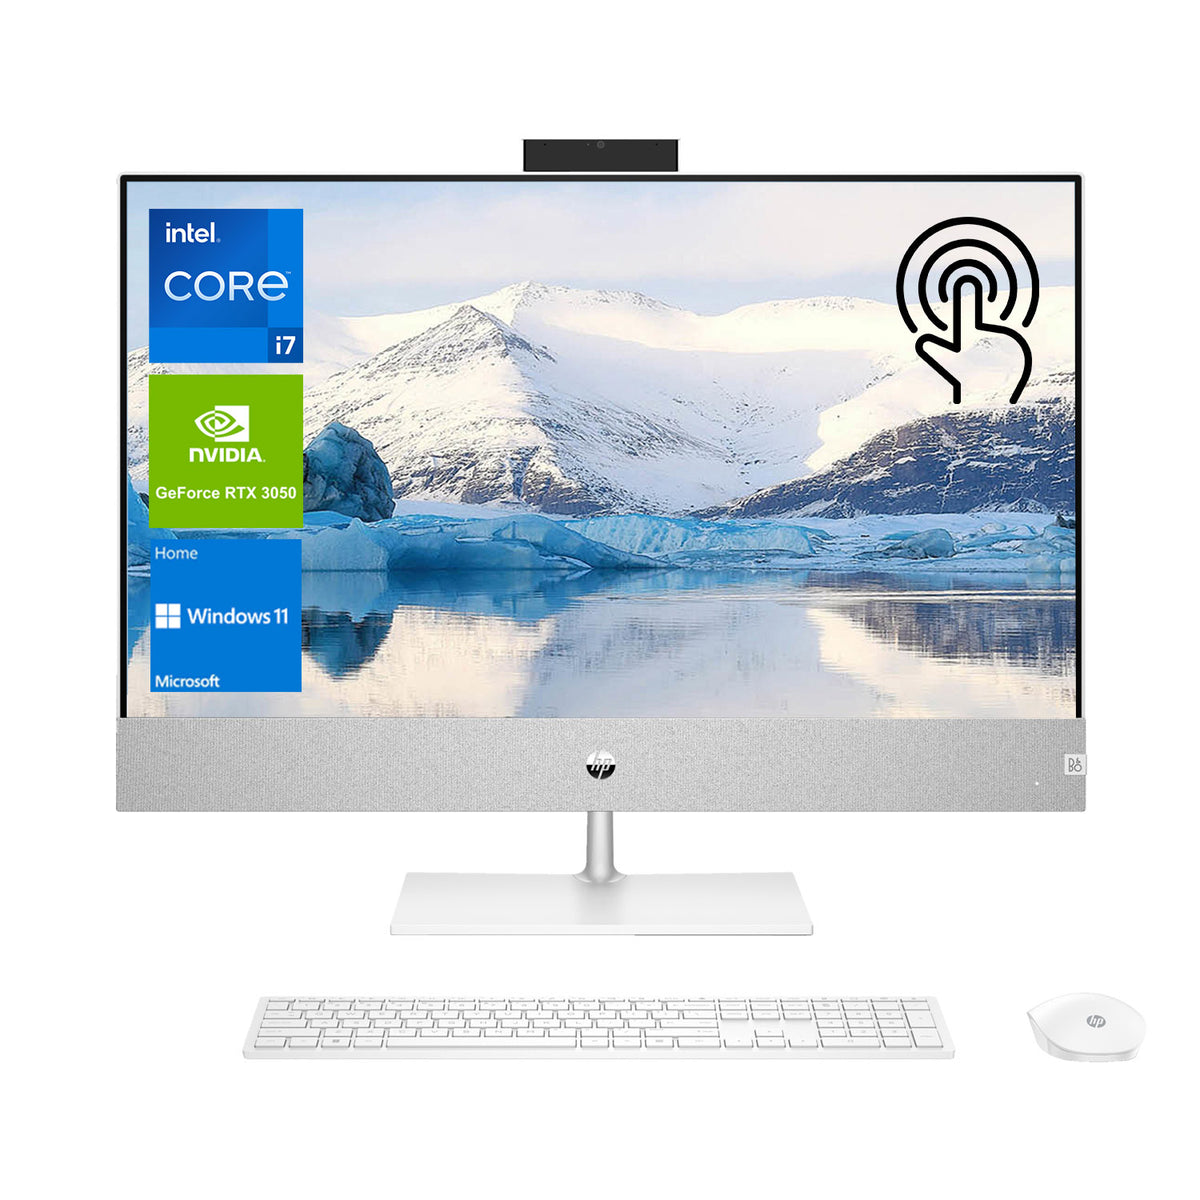 HP Pavilion Daily All-in-One, 27" FHD 1920*1080 Touchscreen 60Hz, Intel Core i7-13700T, NVIDIA GeForce RTX 3050, 8GB DDR4 SODIMM, 1TB PCIe M.2 SSD, Wi-Fi 6, Non-backlit Keyboard, Windows 11 Home, White